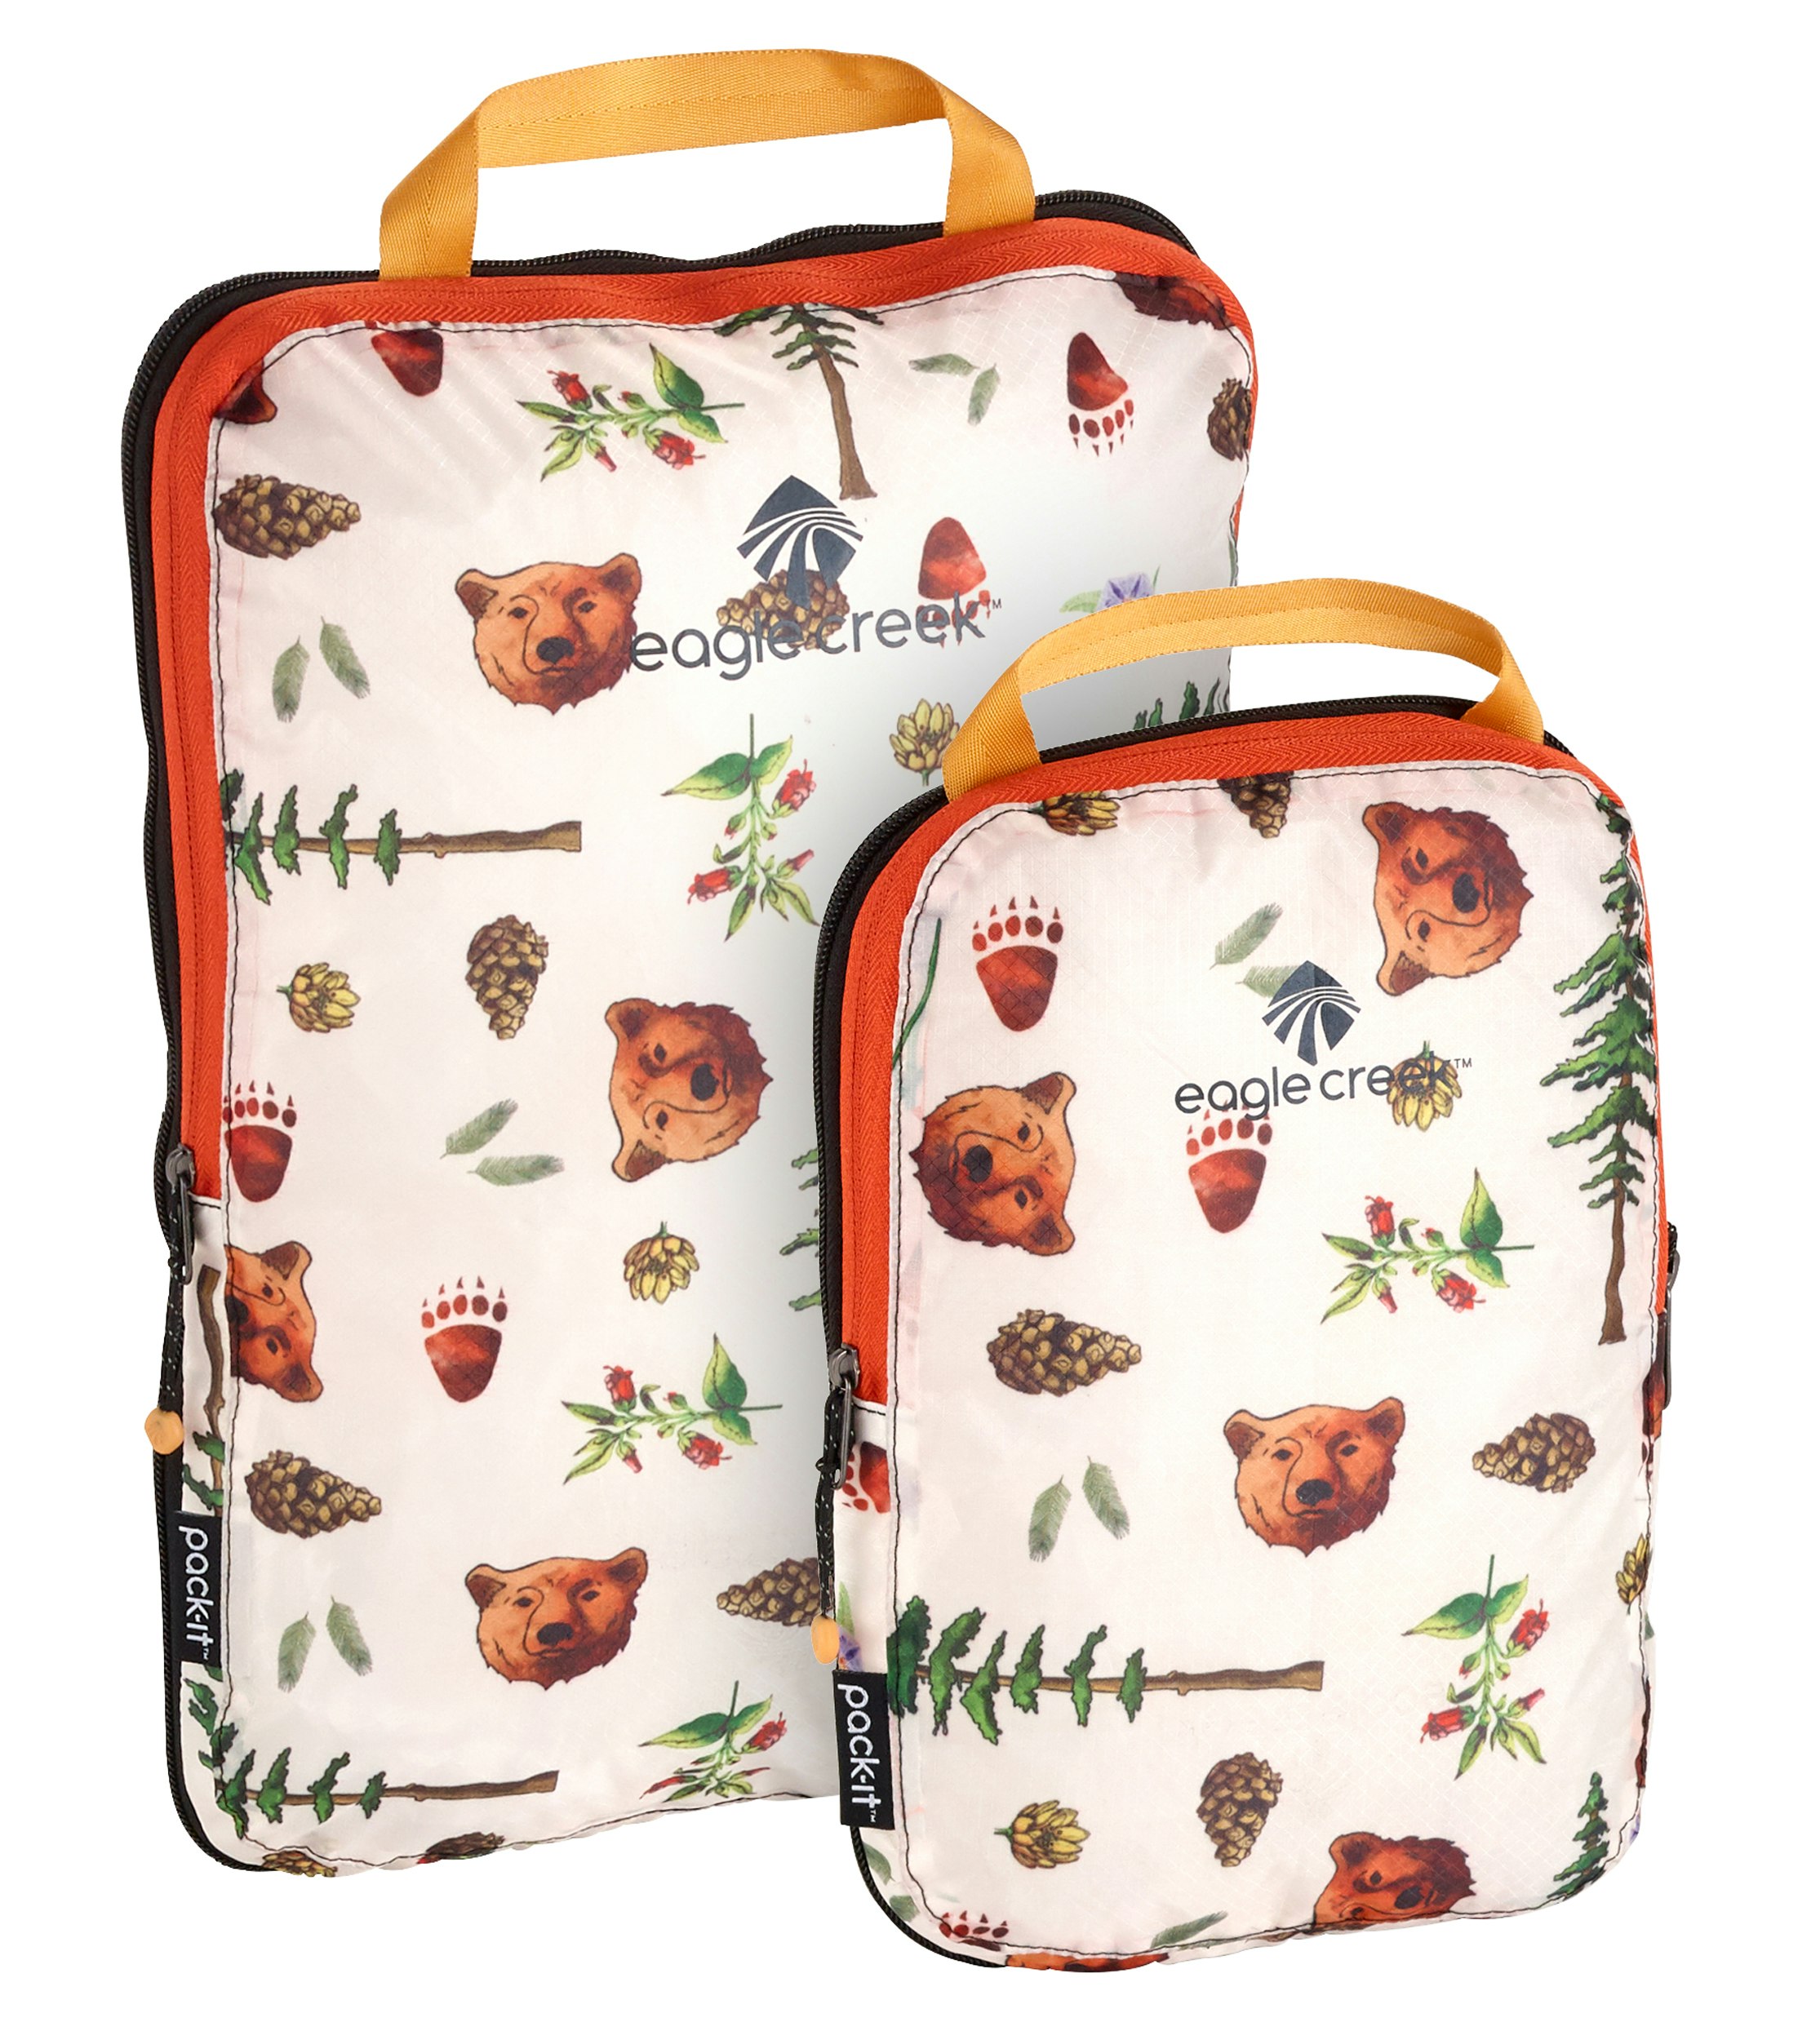 A travel packing cube with white fabric, an bright burnt orange zipper, and a lighter fruit-colored orange carrying strap is decorated with a pattern of brown bears, bear footprints, pinecones, green feathers, and pine trees randomly scattered over the surface.